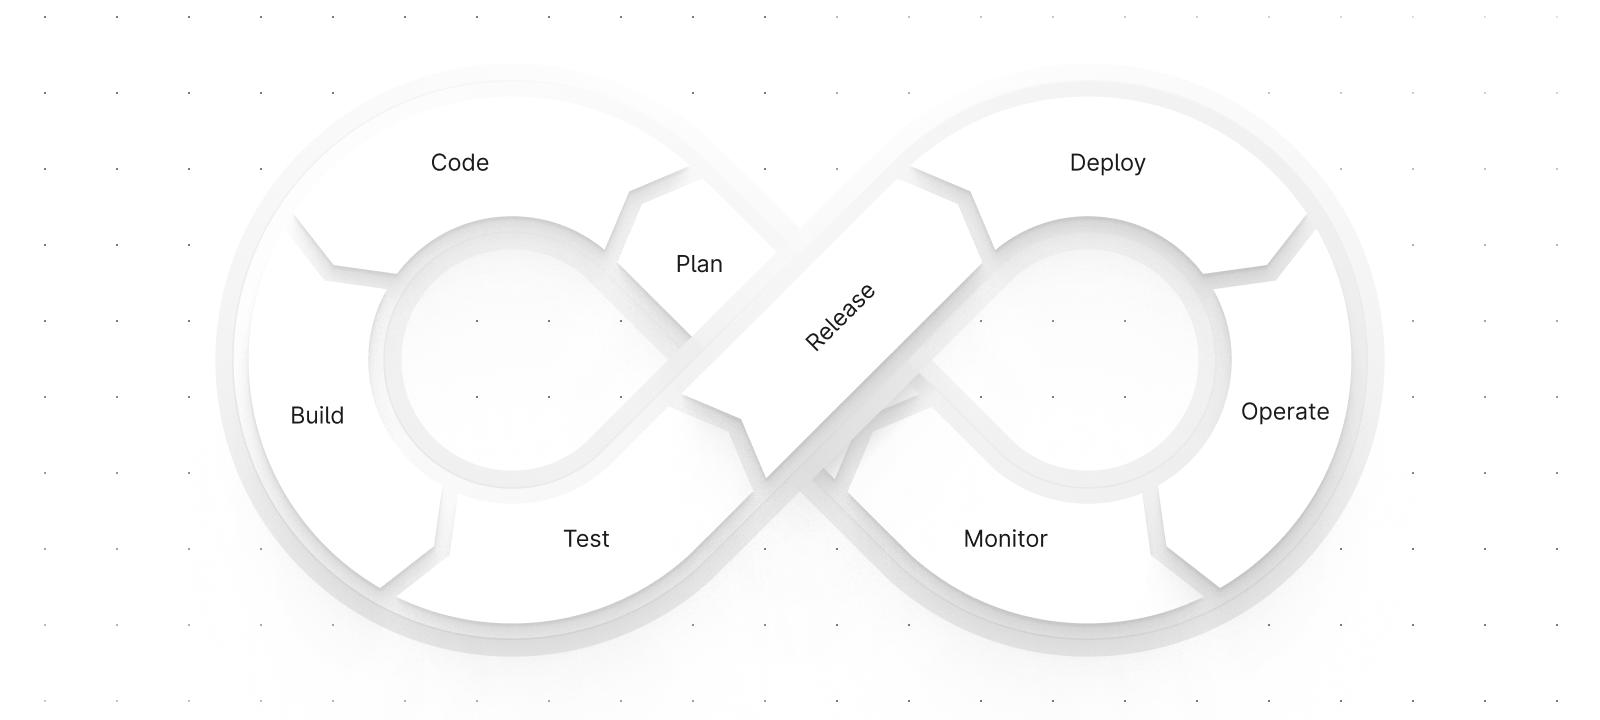 Devops lifecycle - plan, code, build, test, release, deploy, operate, monitor